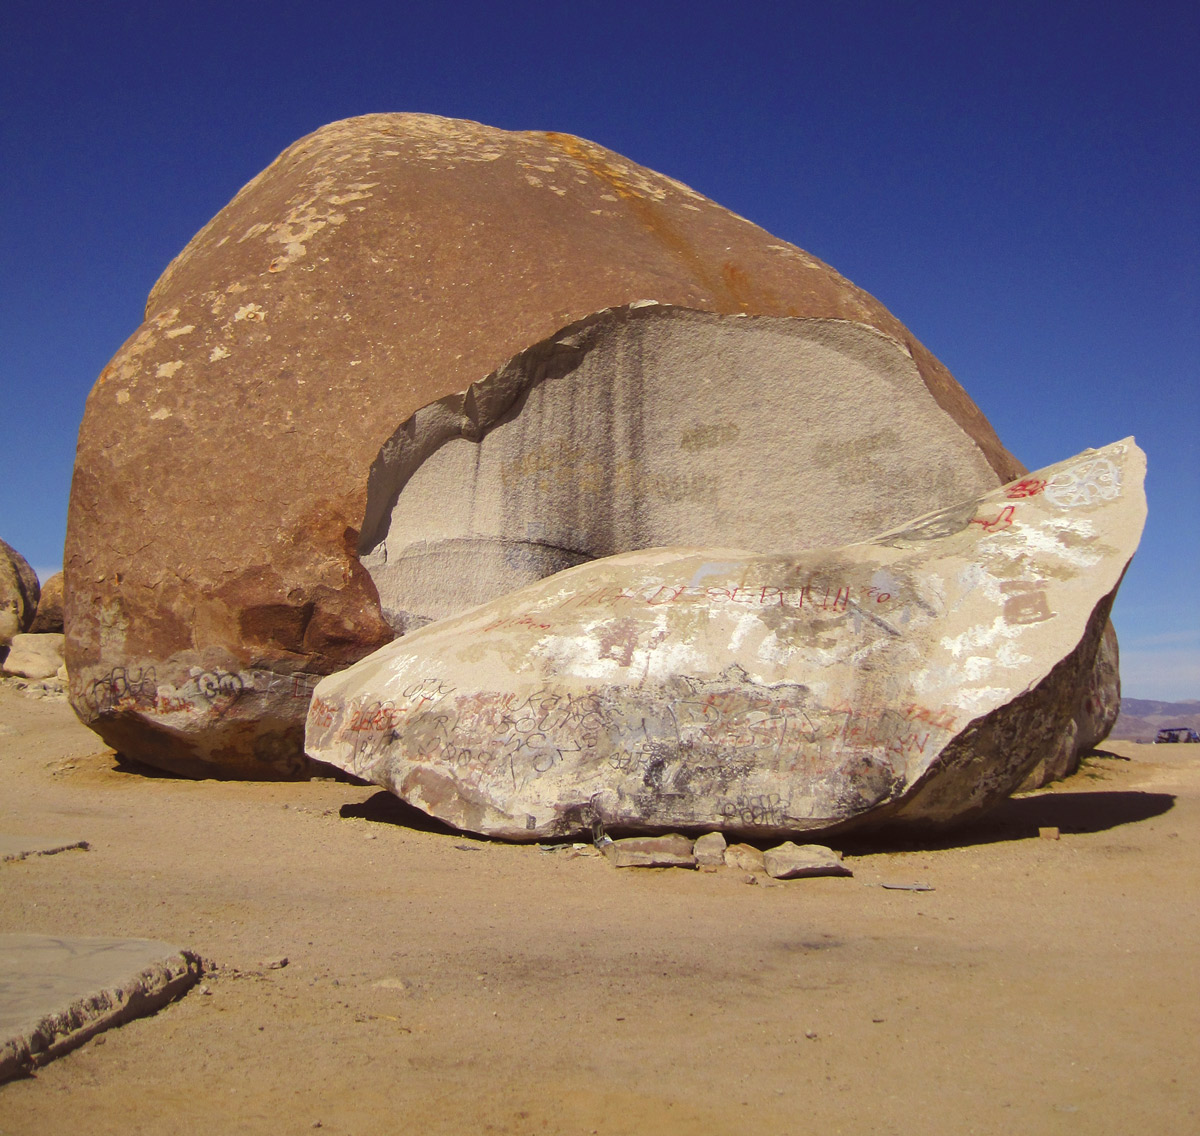 A photograph of Giant Rock today, covered in a number of graffiti tags.